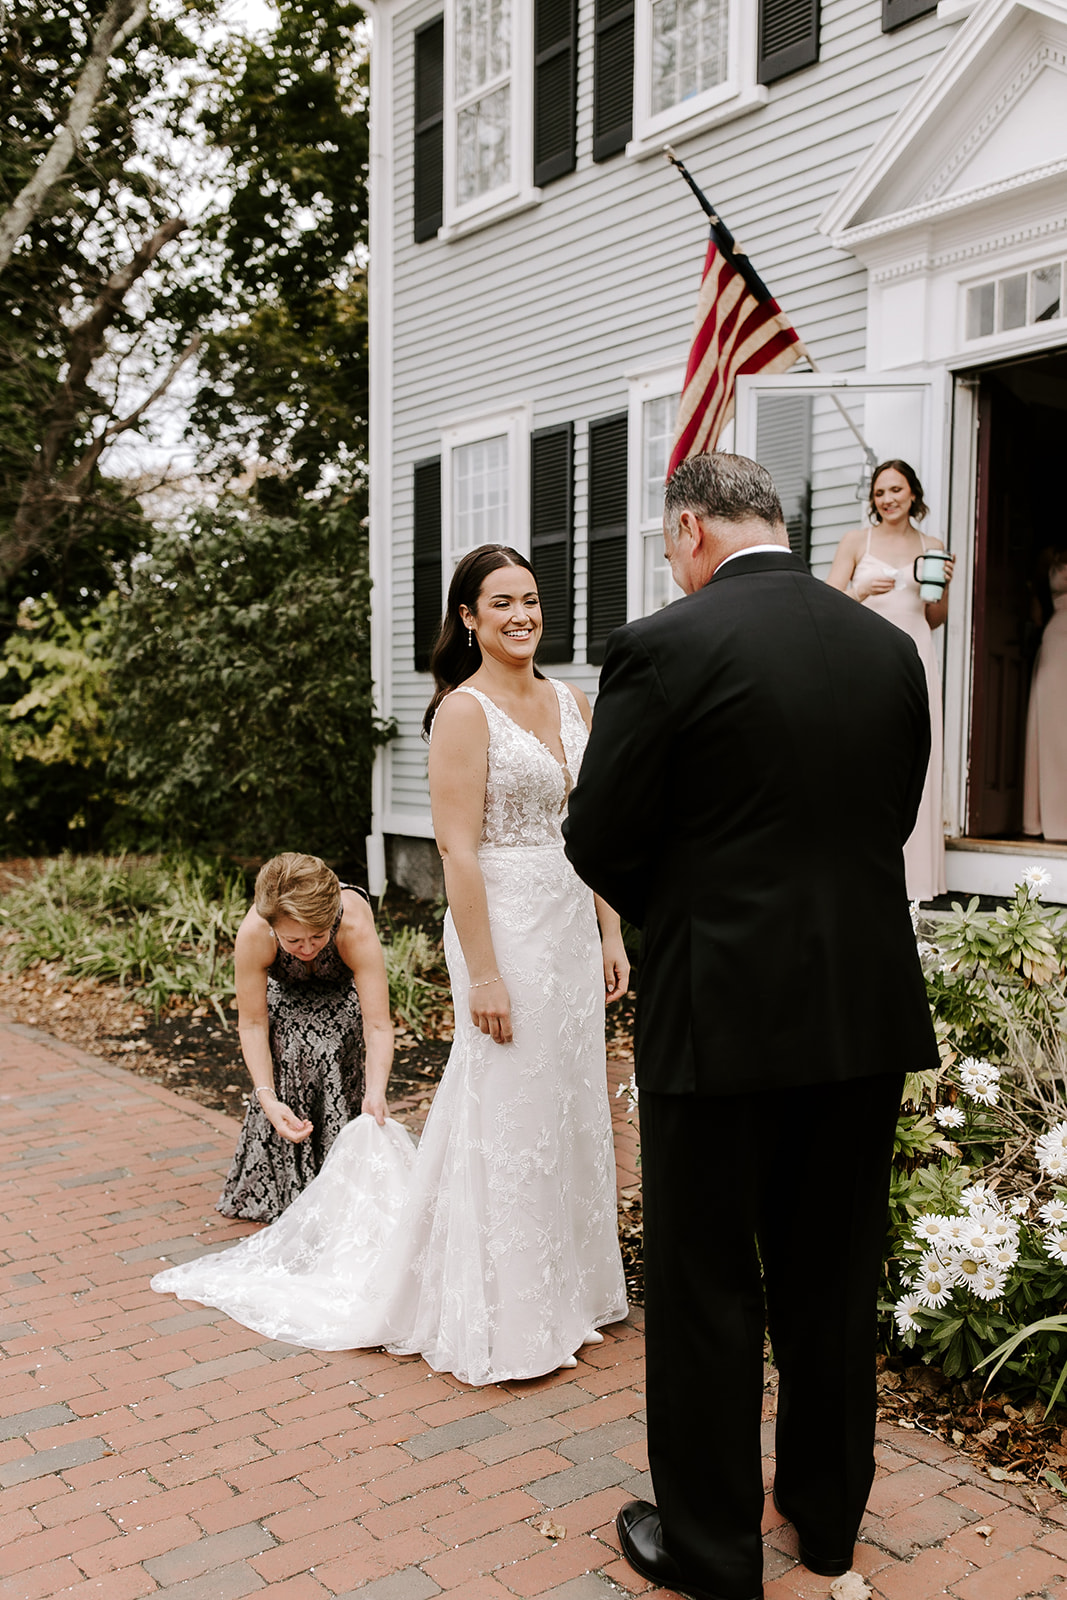 Stunning bride shares a first look moment with her dad and rest of her family!